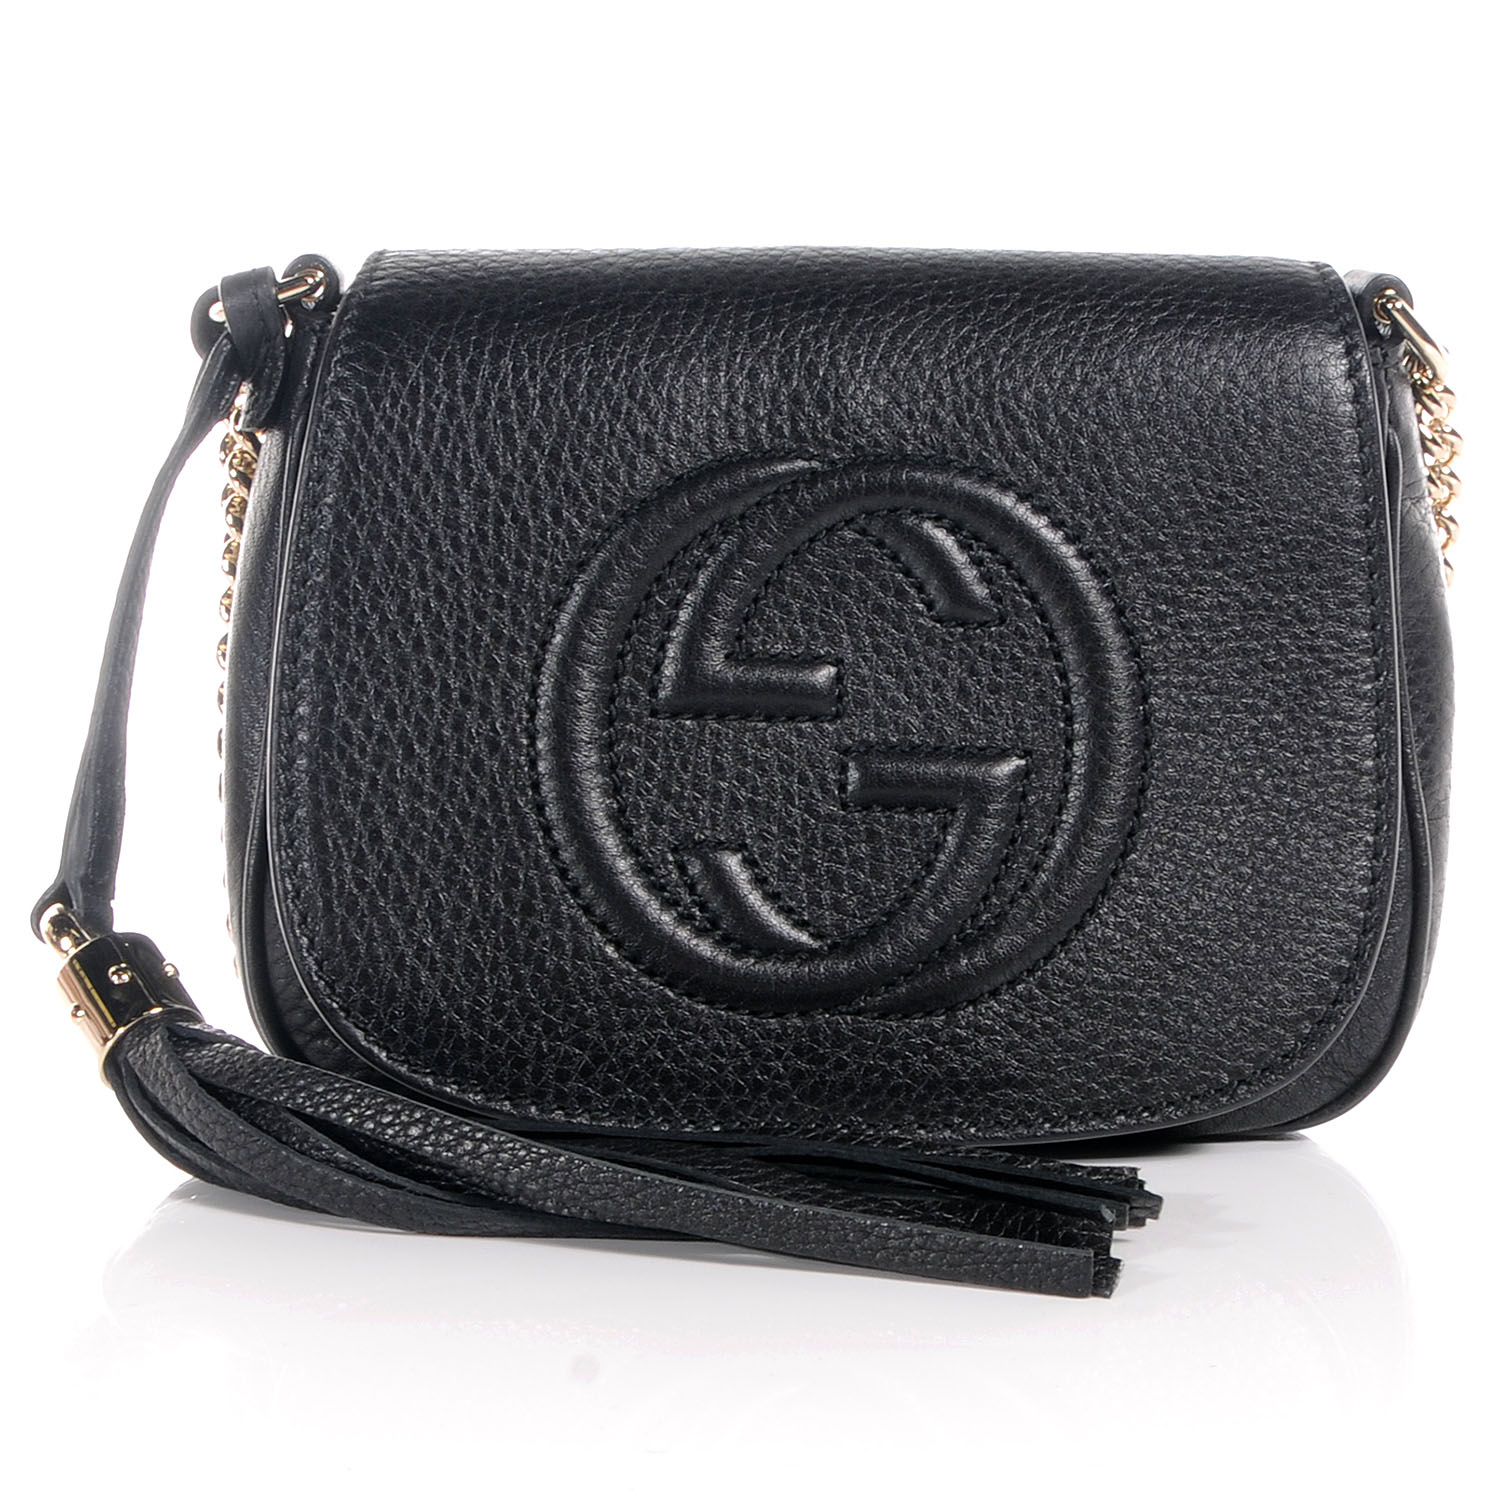 GUCCI Leather Small Soho Chain Shoulder Bag Black 56066